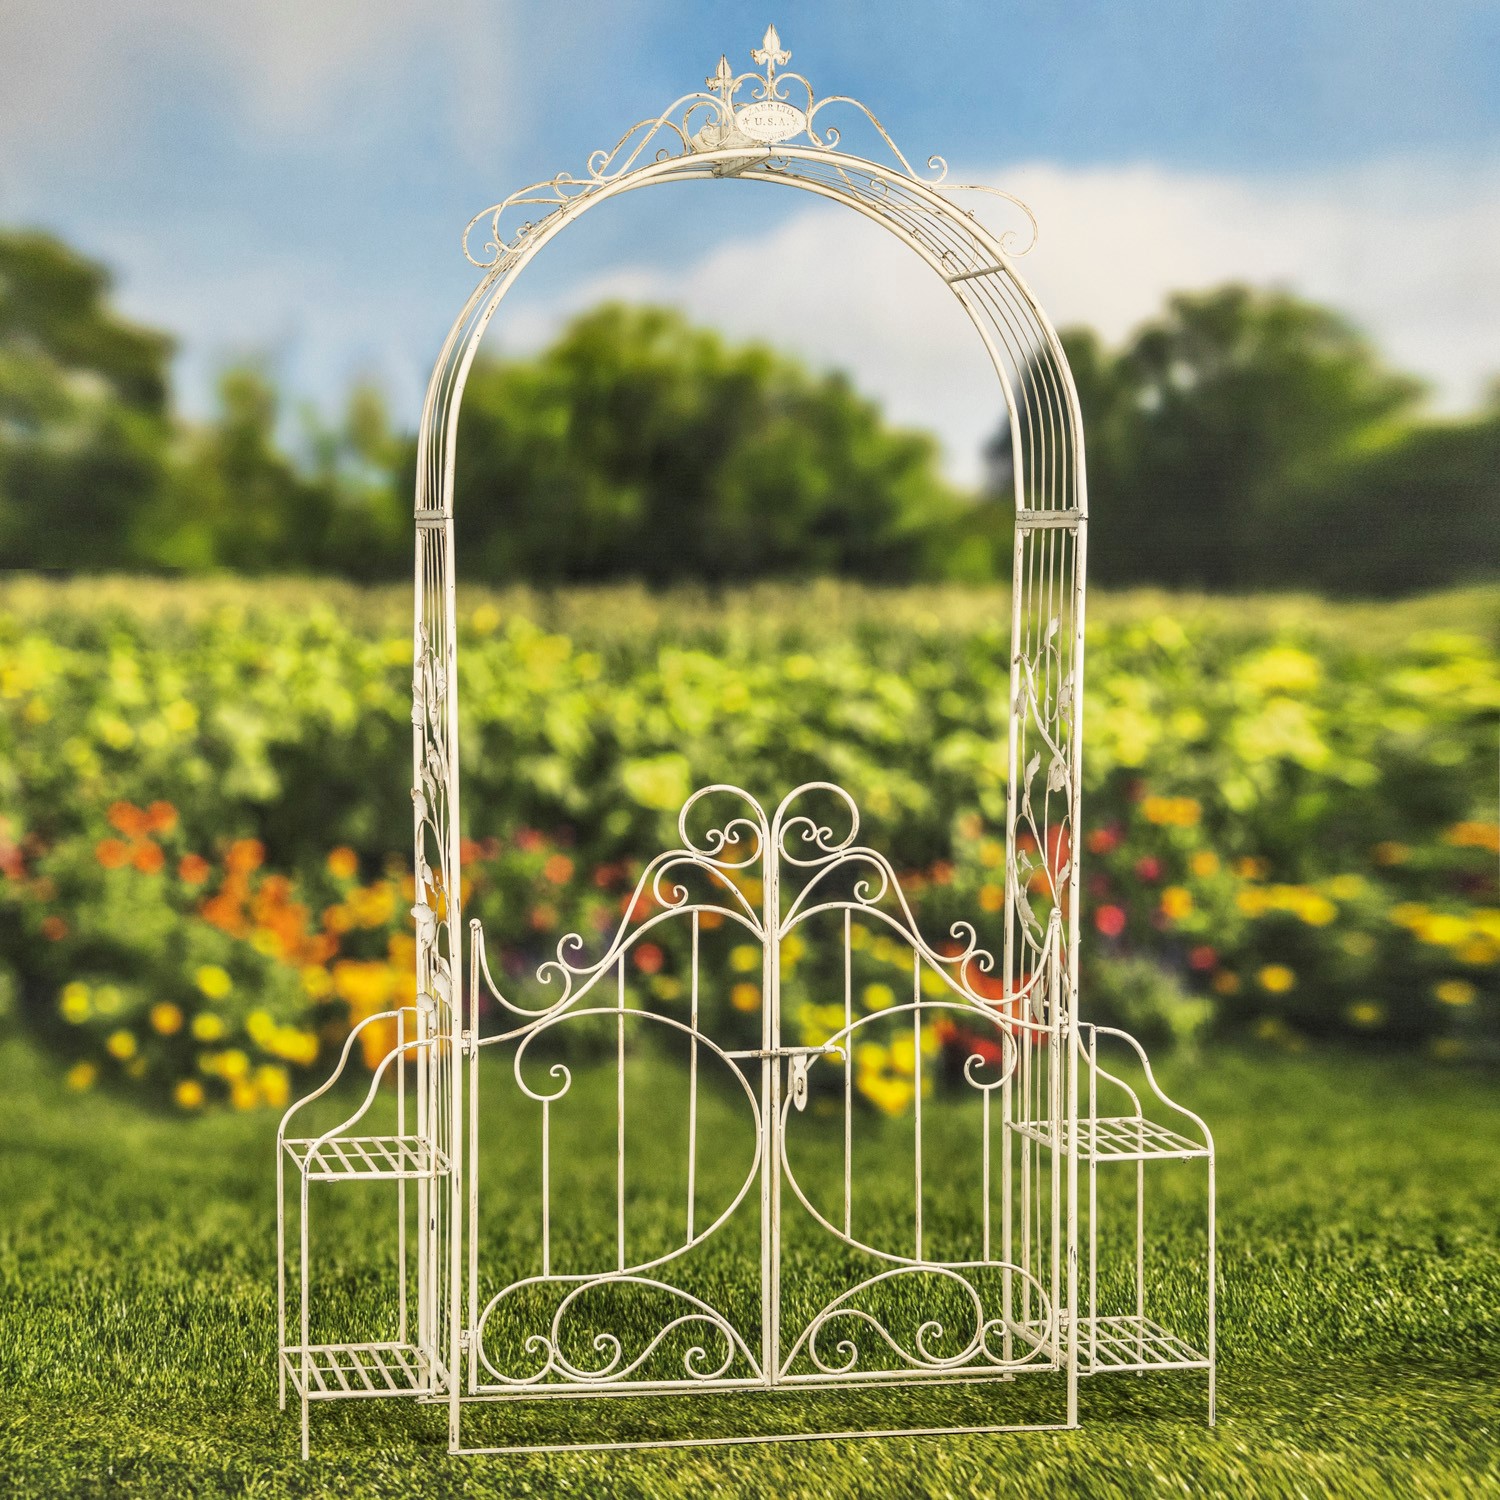 Zaer Ltd International "Stephania" 8ft. Tall Garden Gate Arch with Side Plant Stands in Antique White ZR180830-AW